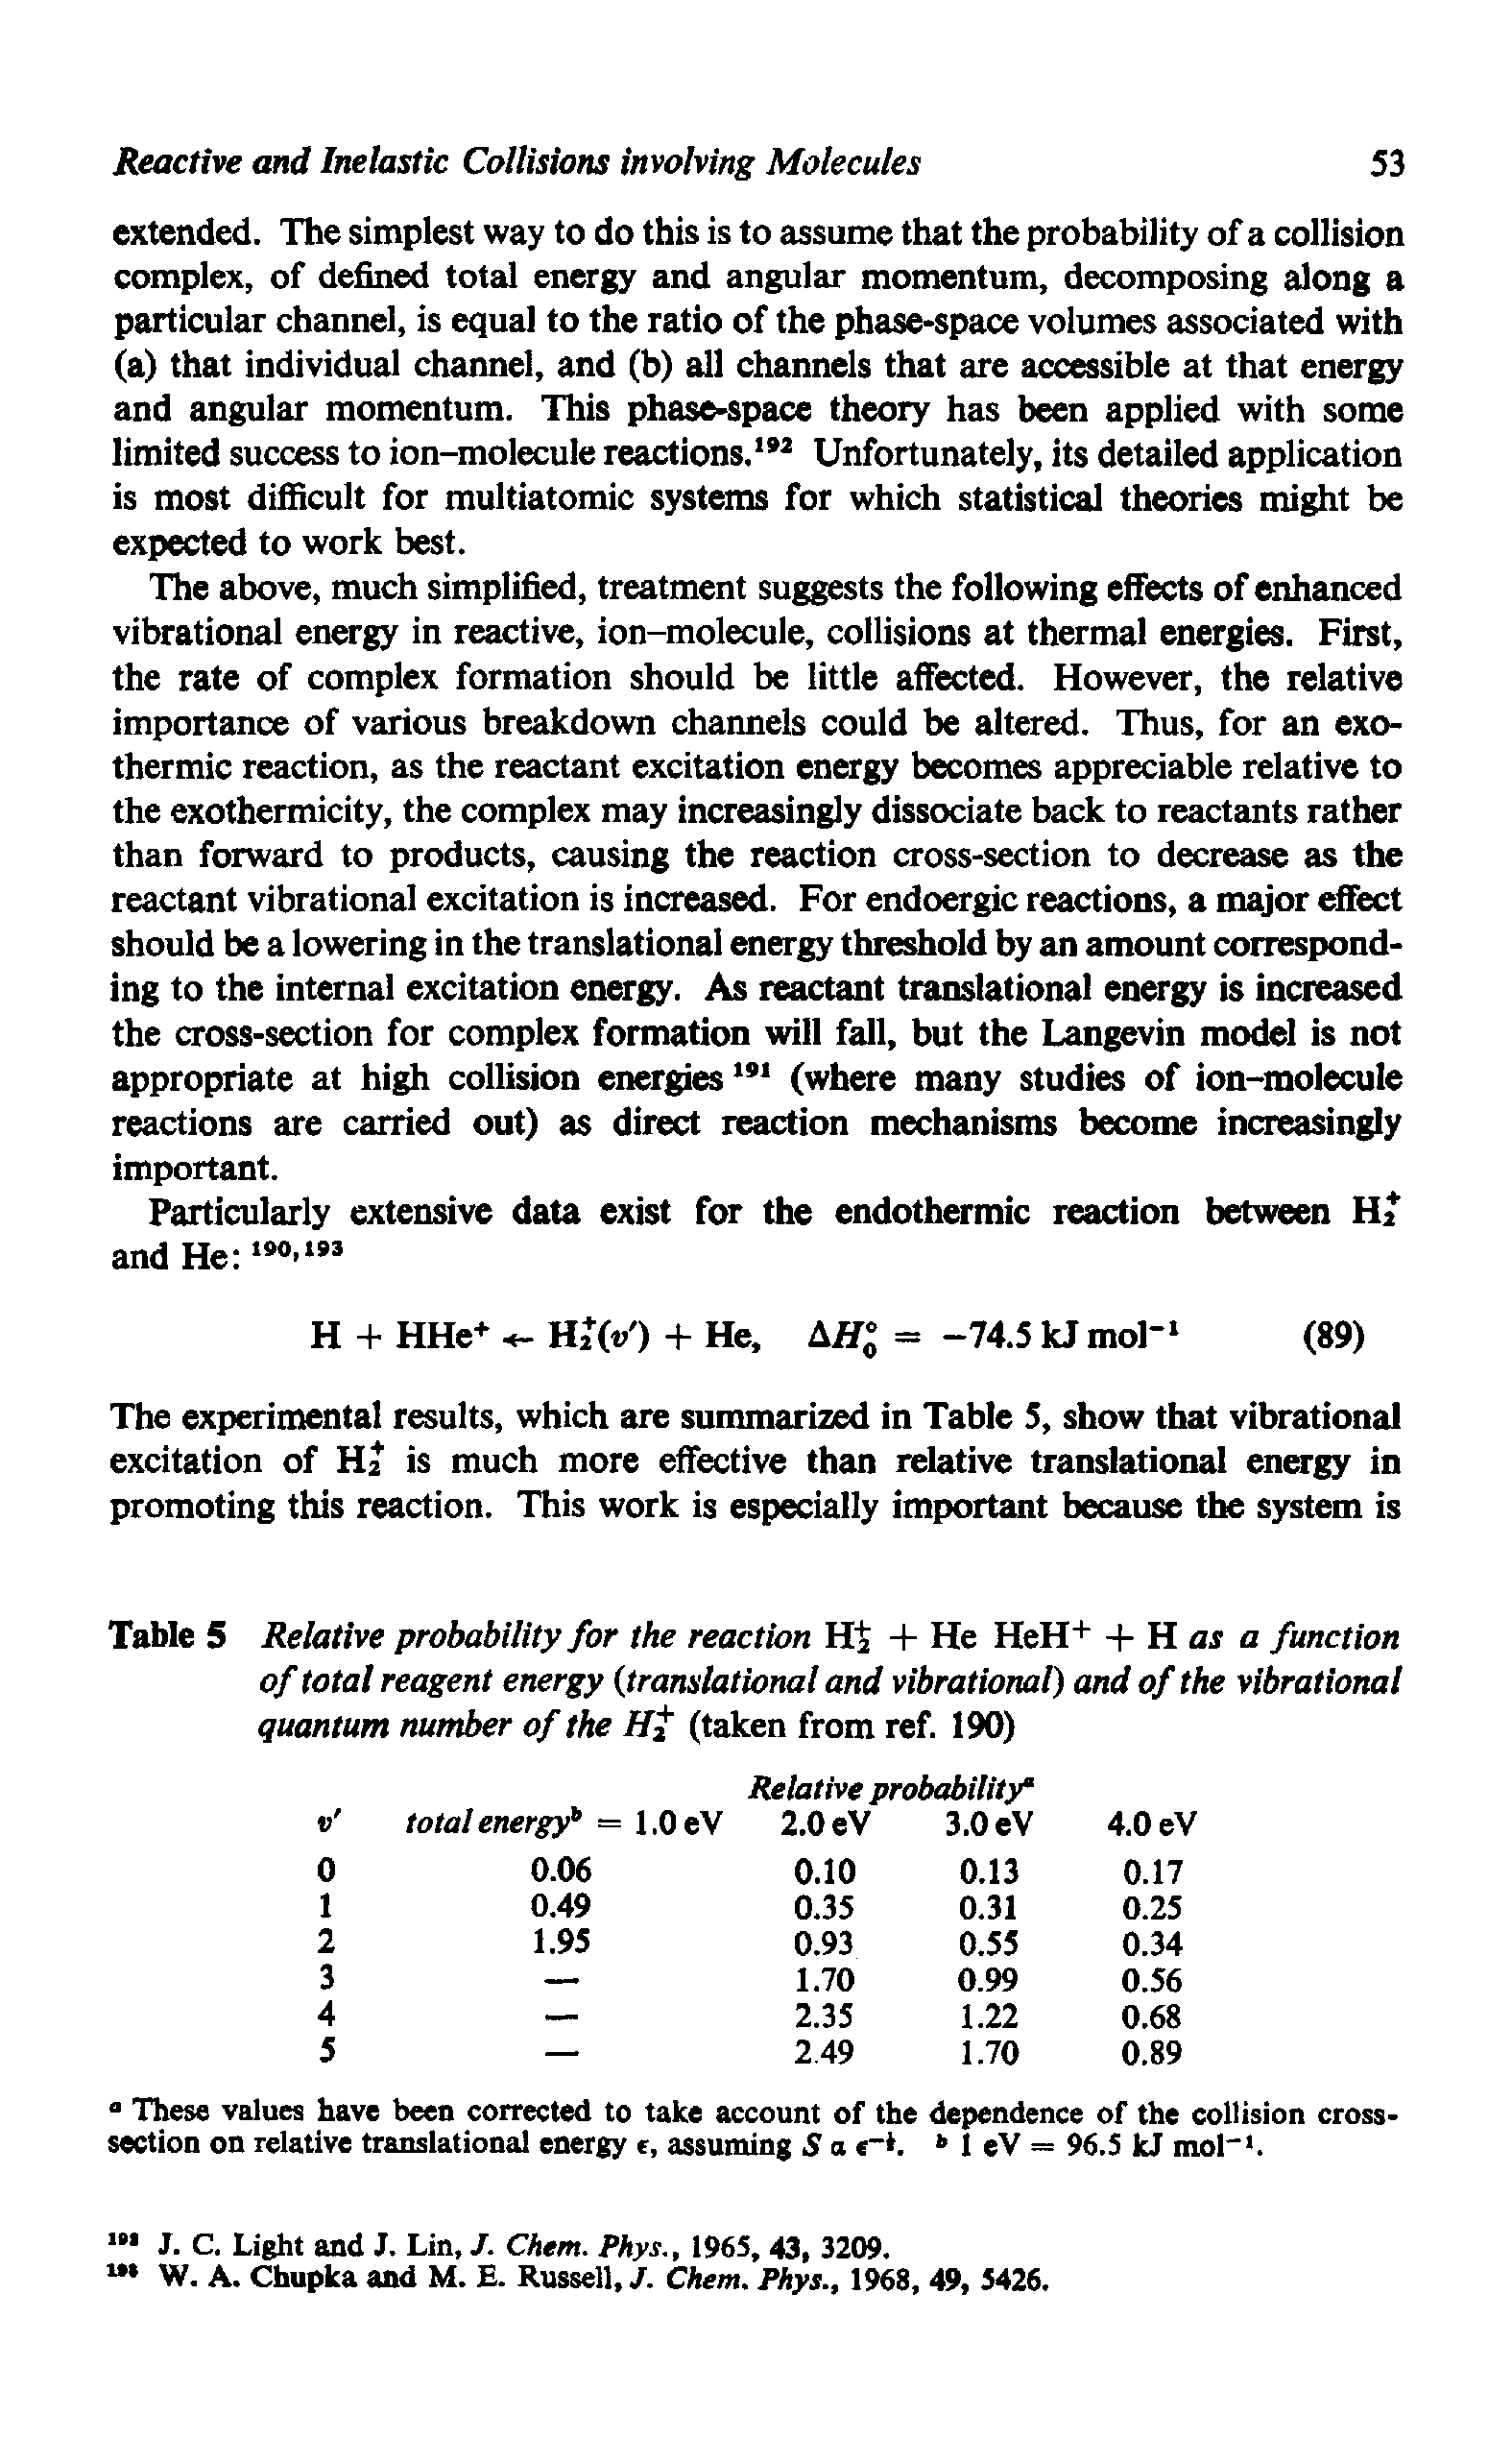 Table 5 Relative probability for the reaction H4 4- He HeH+ - - H ar a function of total reagent energy translational and vibrational) and of the vibrational quantum number of the Hf (taken from ref. 190)...